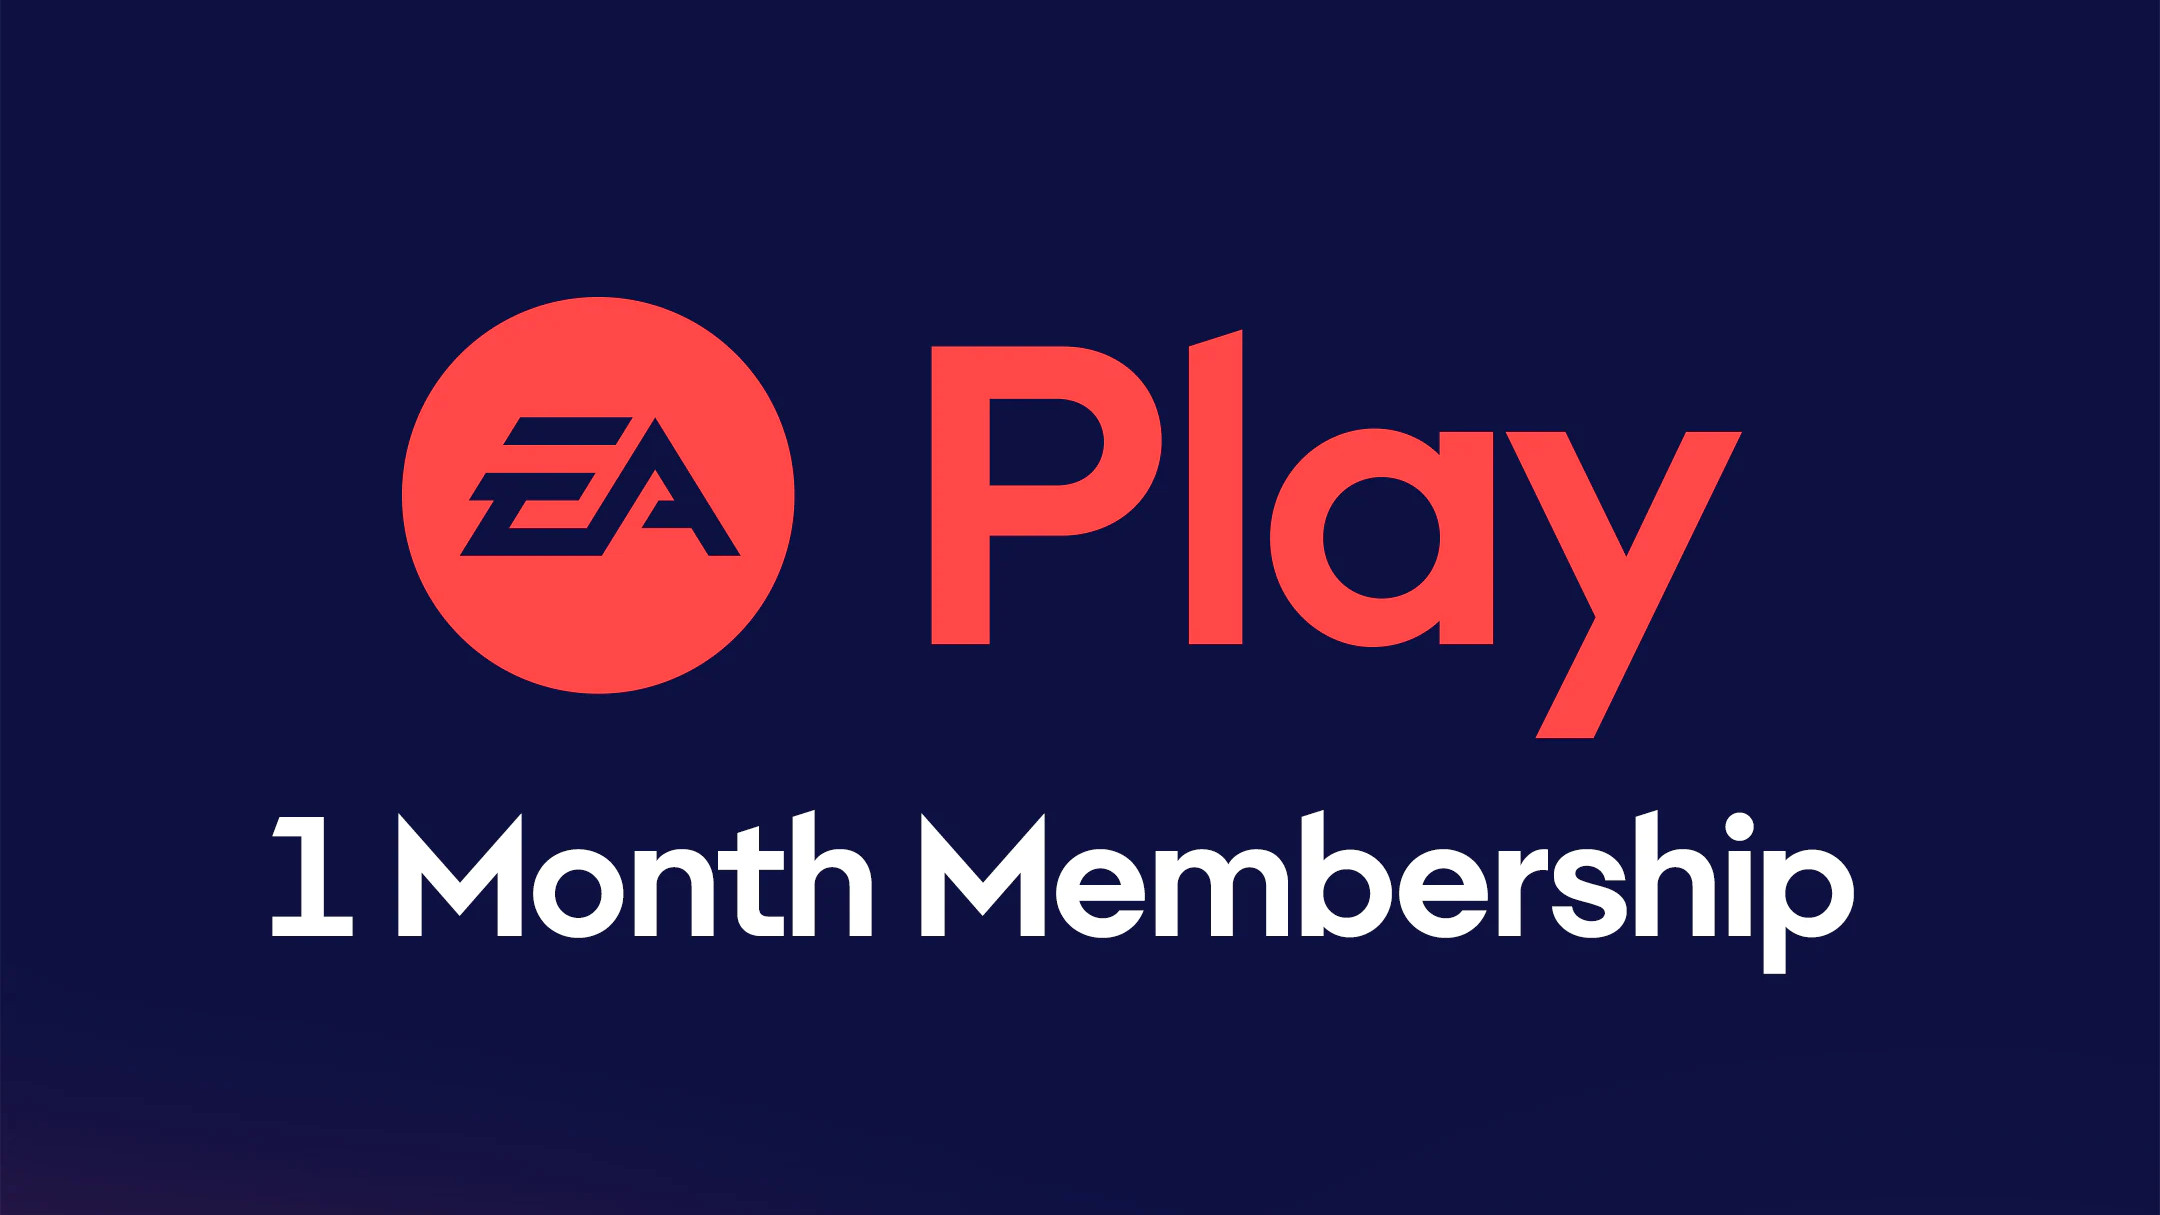 EA Play - 1 Month Subscription Key, $20.31